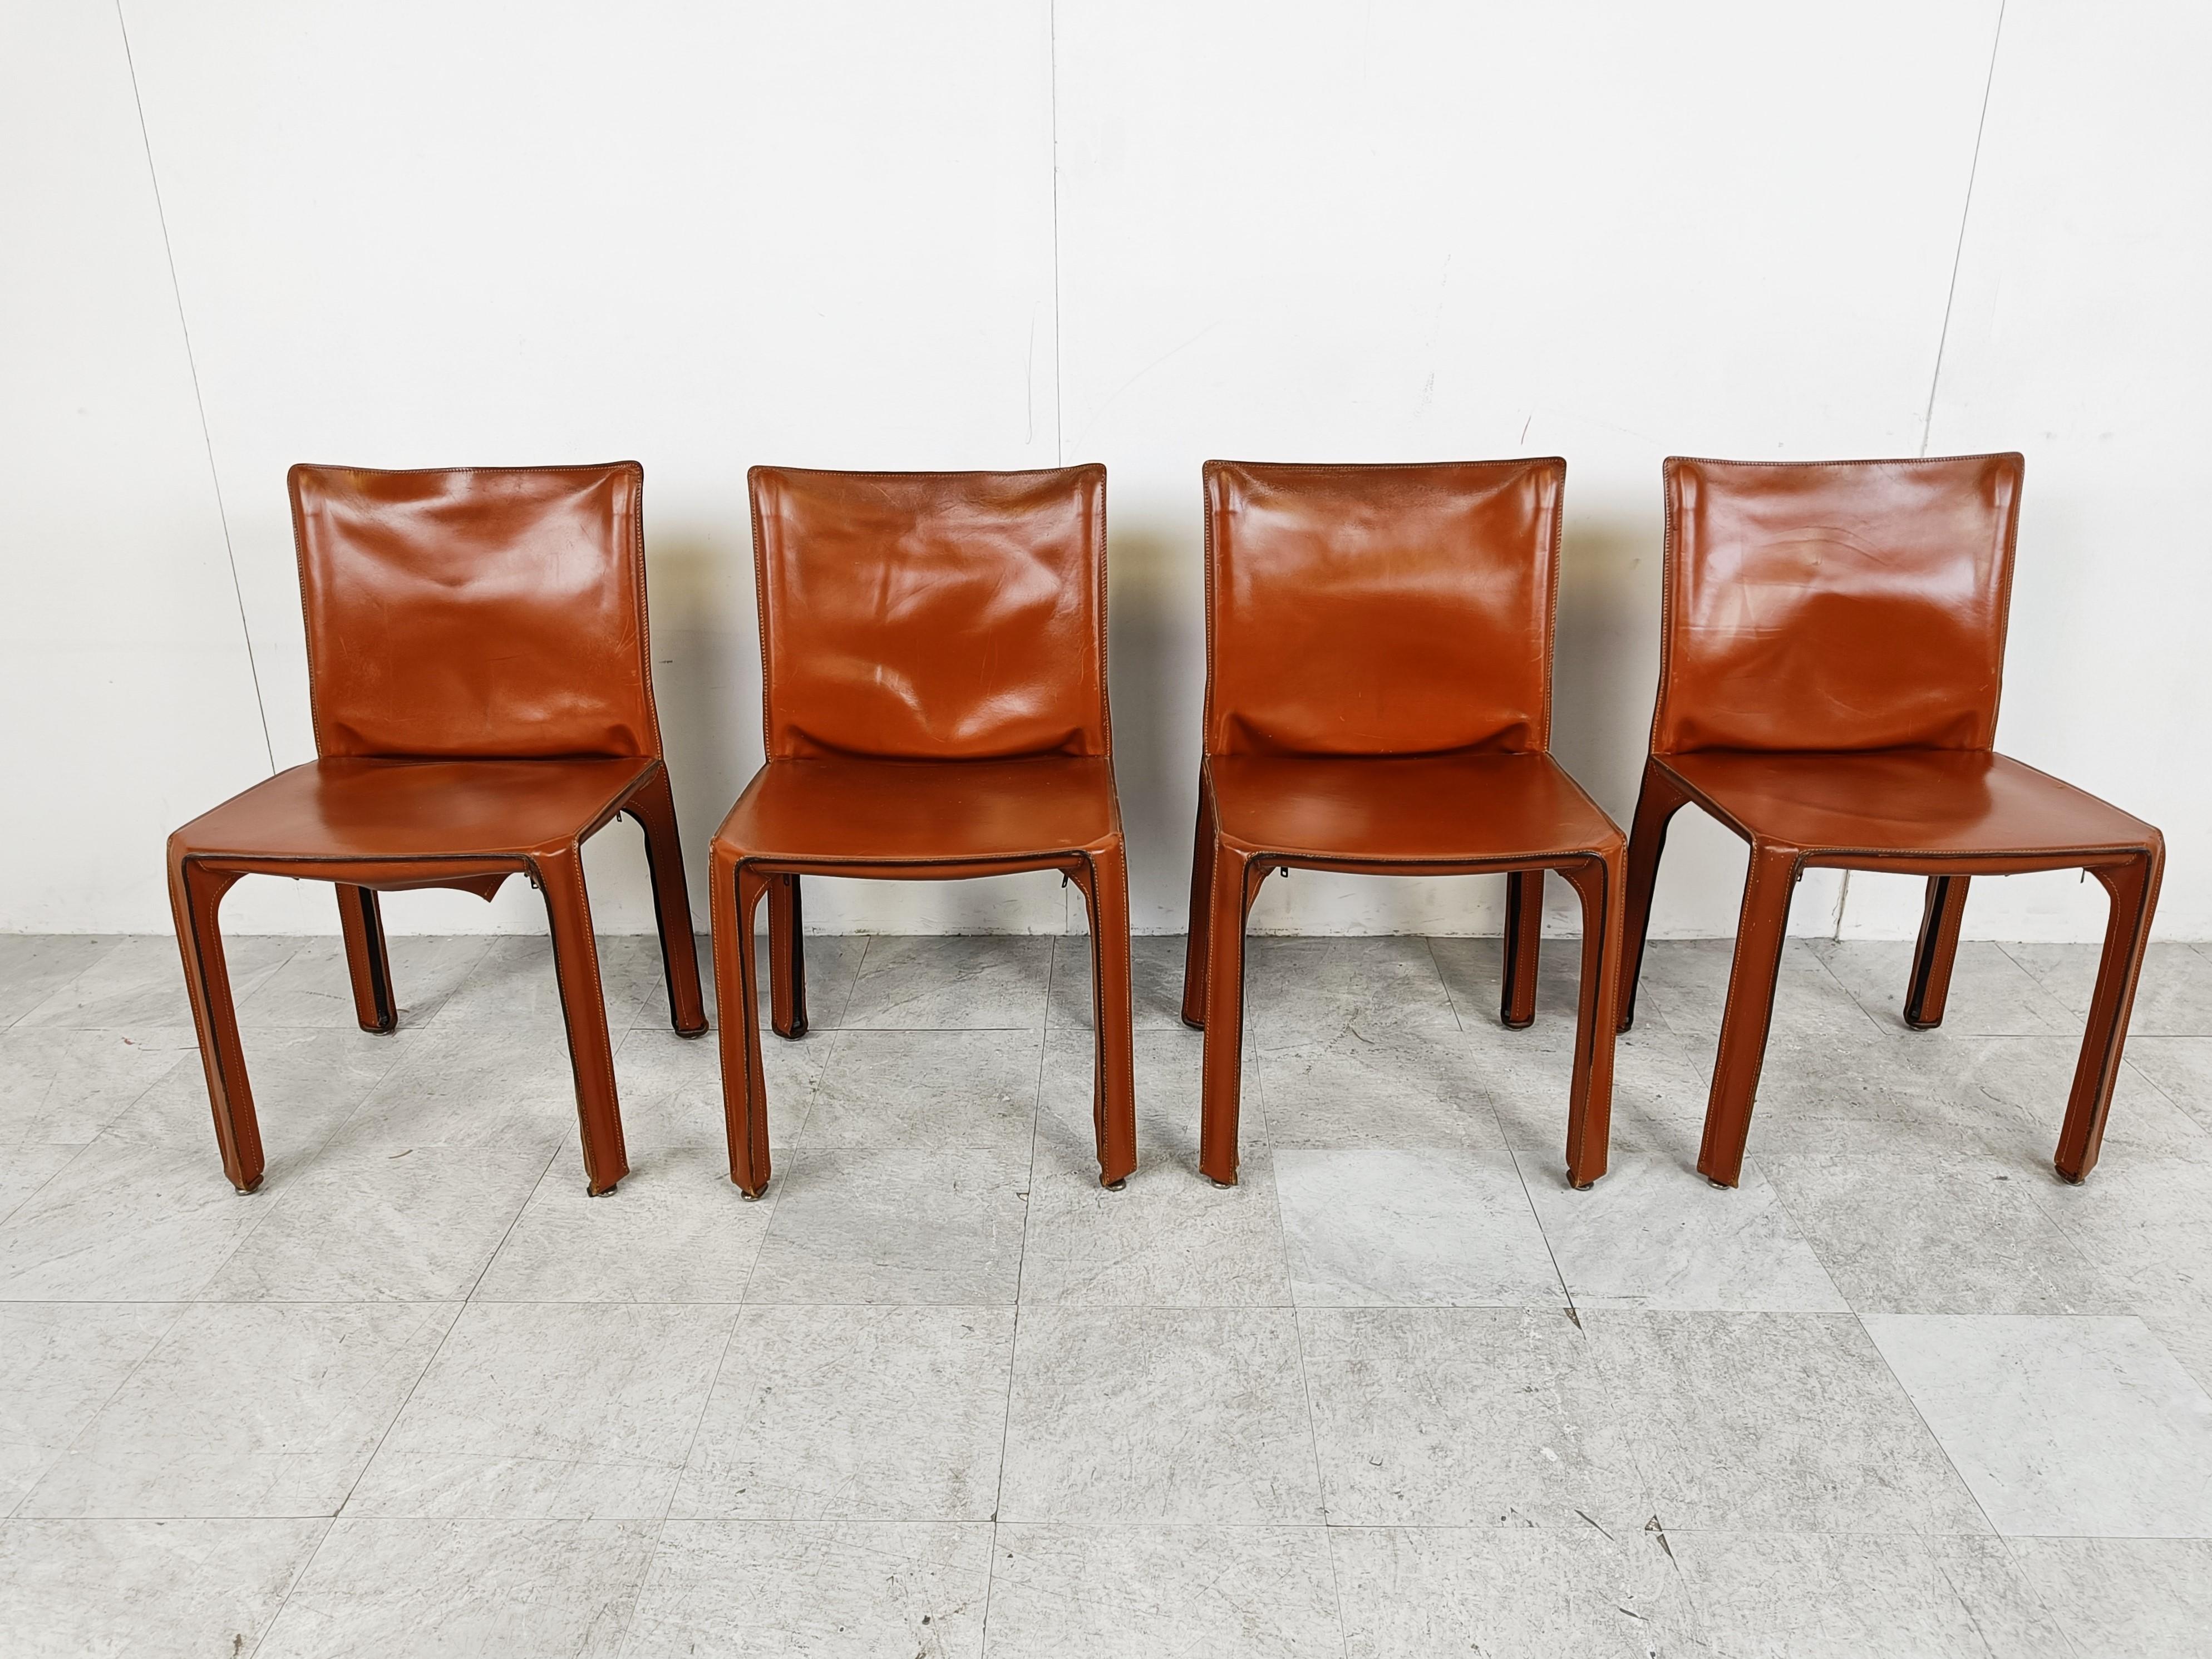 Set of 4 vintage red leather cab chairs designed by Mario Bellini for Cassina

1980s - Italy

Good condition with normal age related wear

Dimensions:
Height: 82cm/32.28